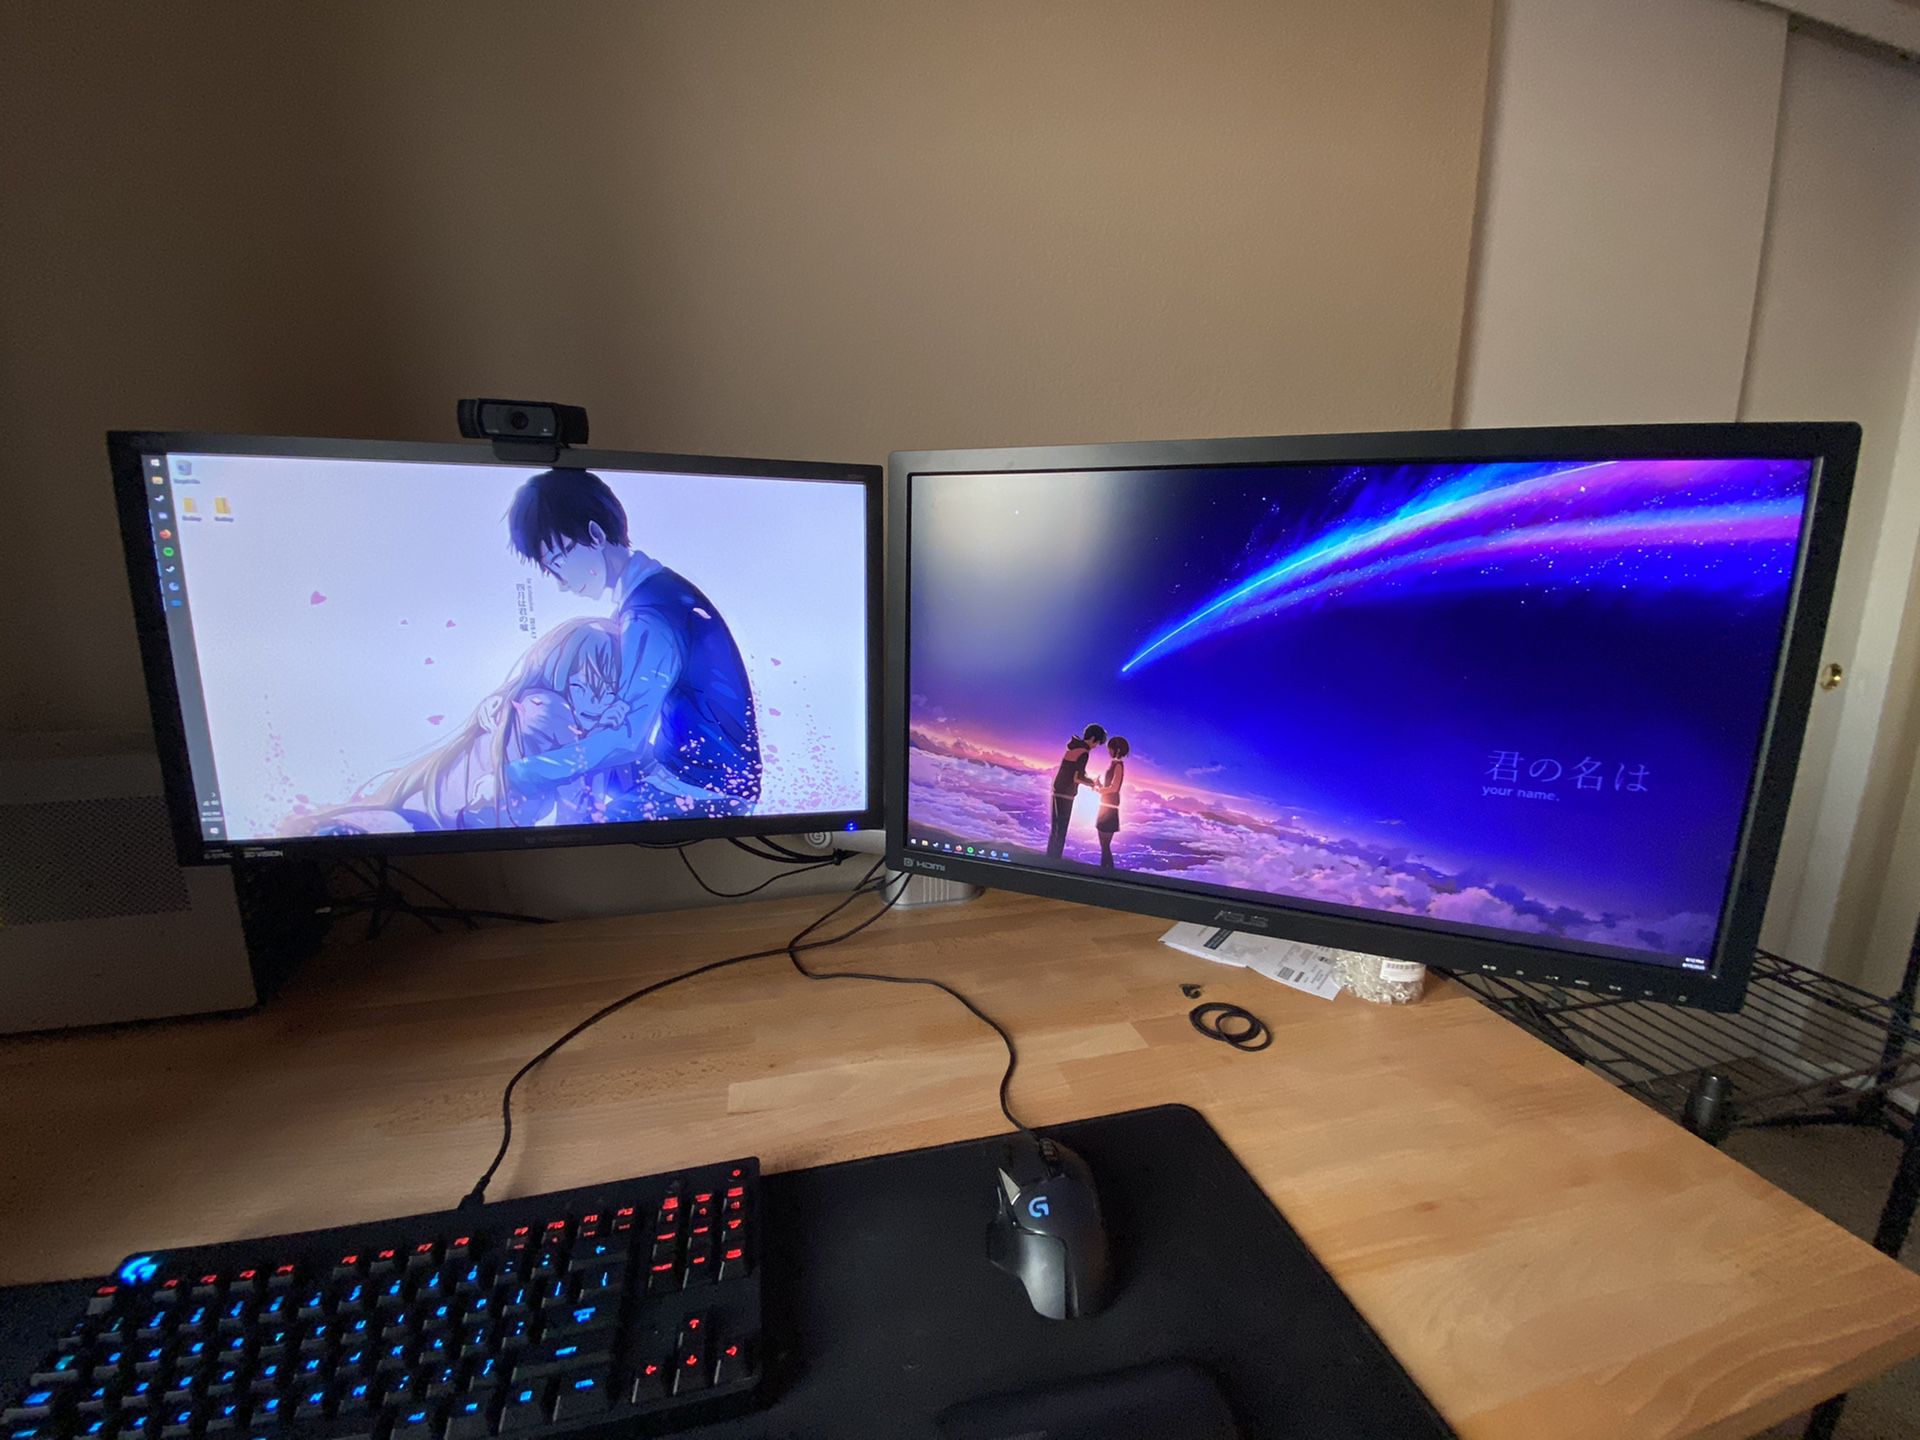 Double monitor arm stands